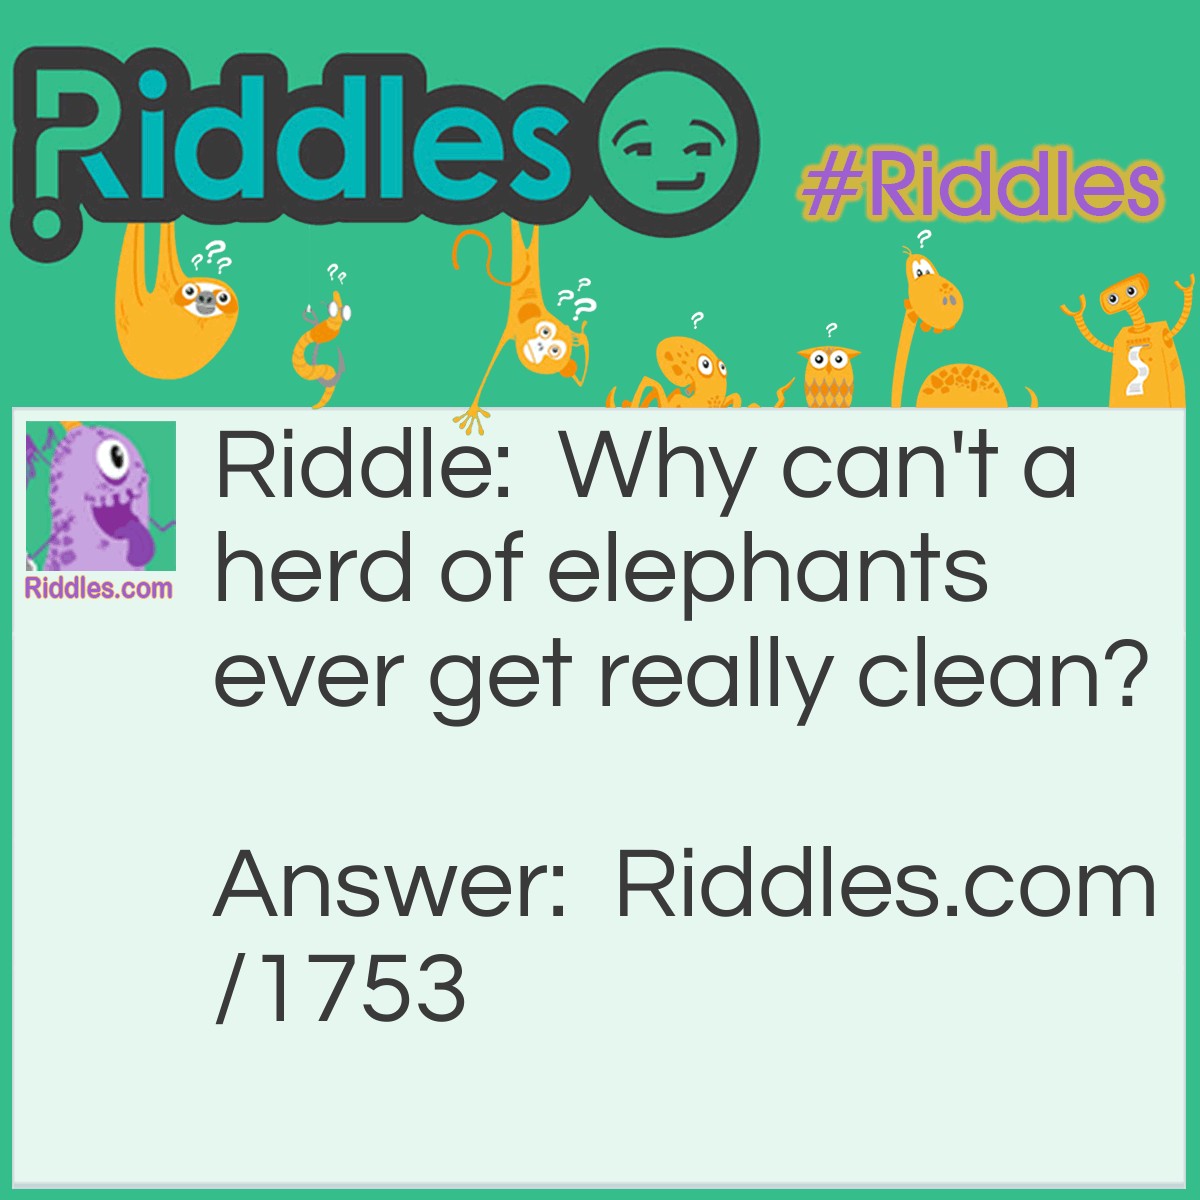 Riddle: Why can't a herd of elephants ever get really clean? Answer: Because they can't take off their trunks.